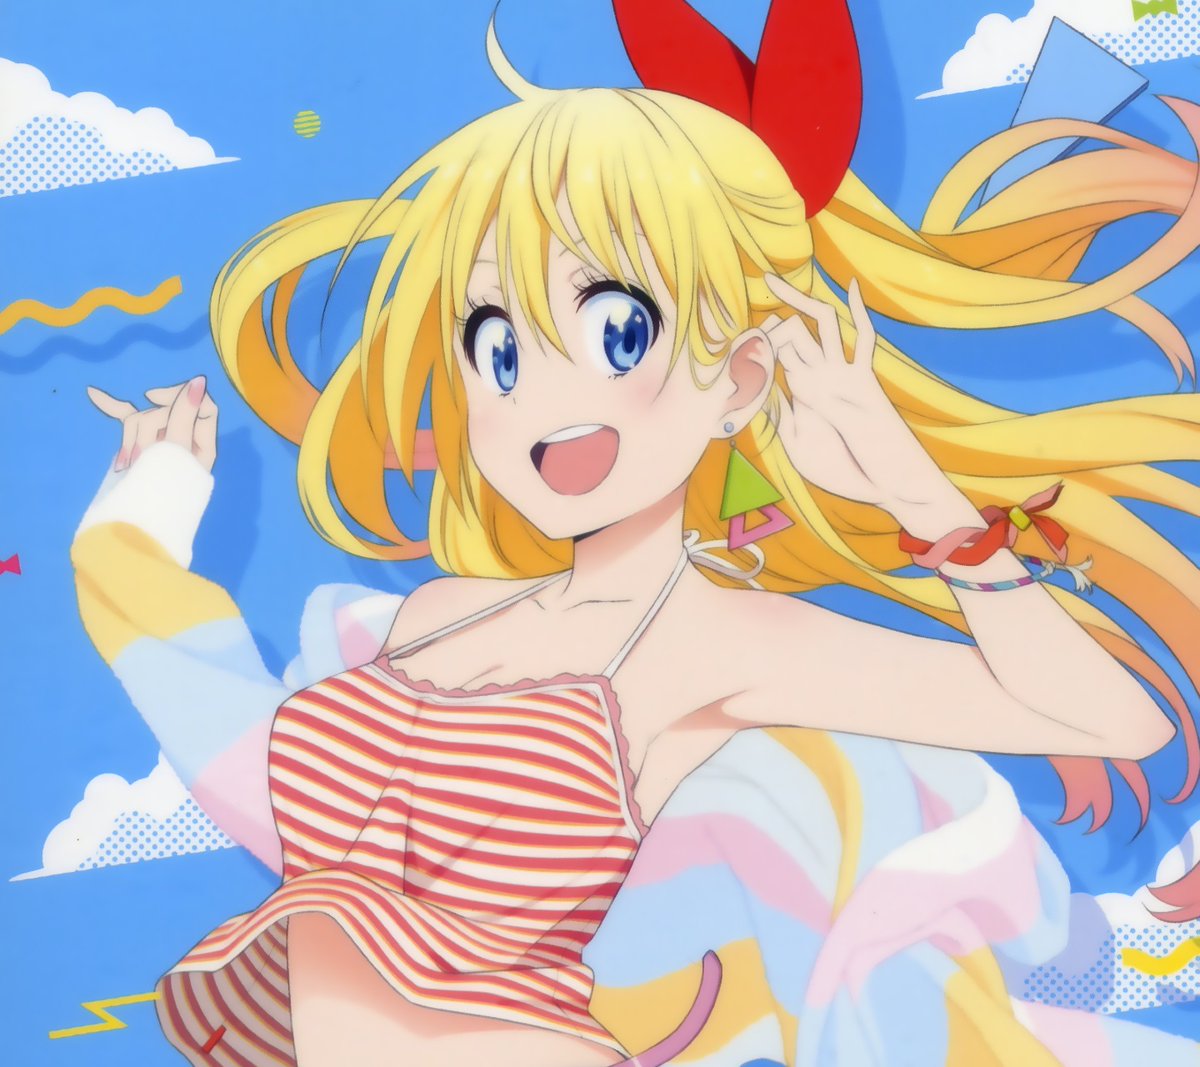 Chitoge Kirisaki- Another tsundere baby to the list I'm still watching Nisekoi, but my heart's in it for her by now. And I don't think that's changing any time soon